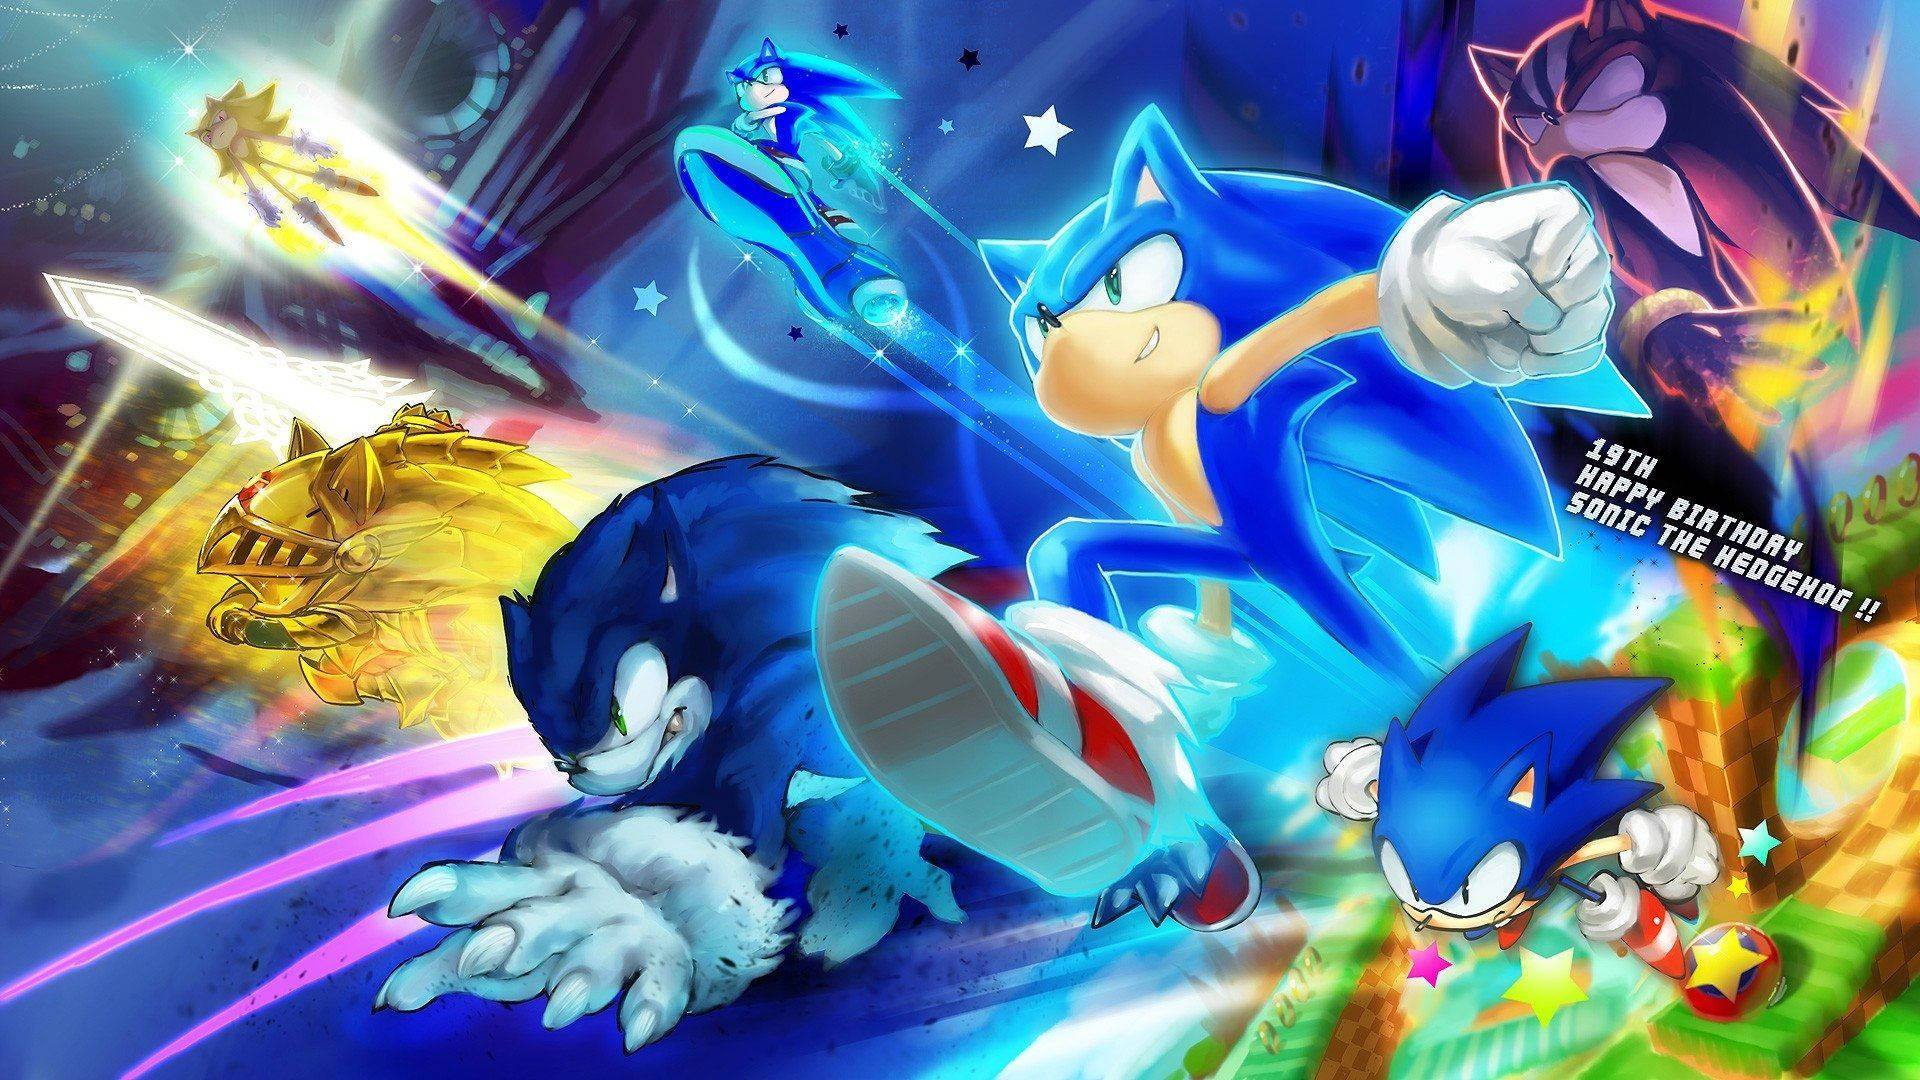 A powerful and iconic look of Sonic the Hedgehog Wallpaper